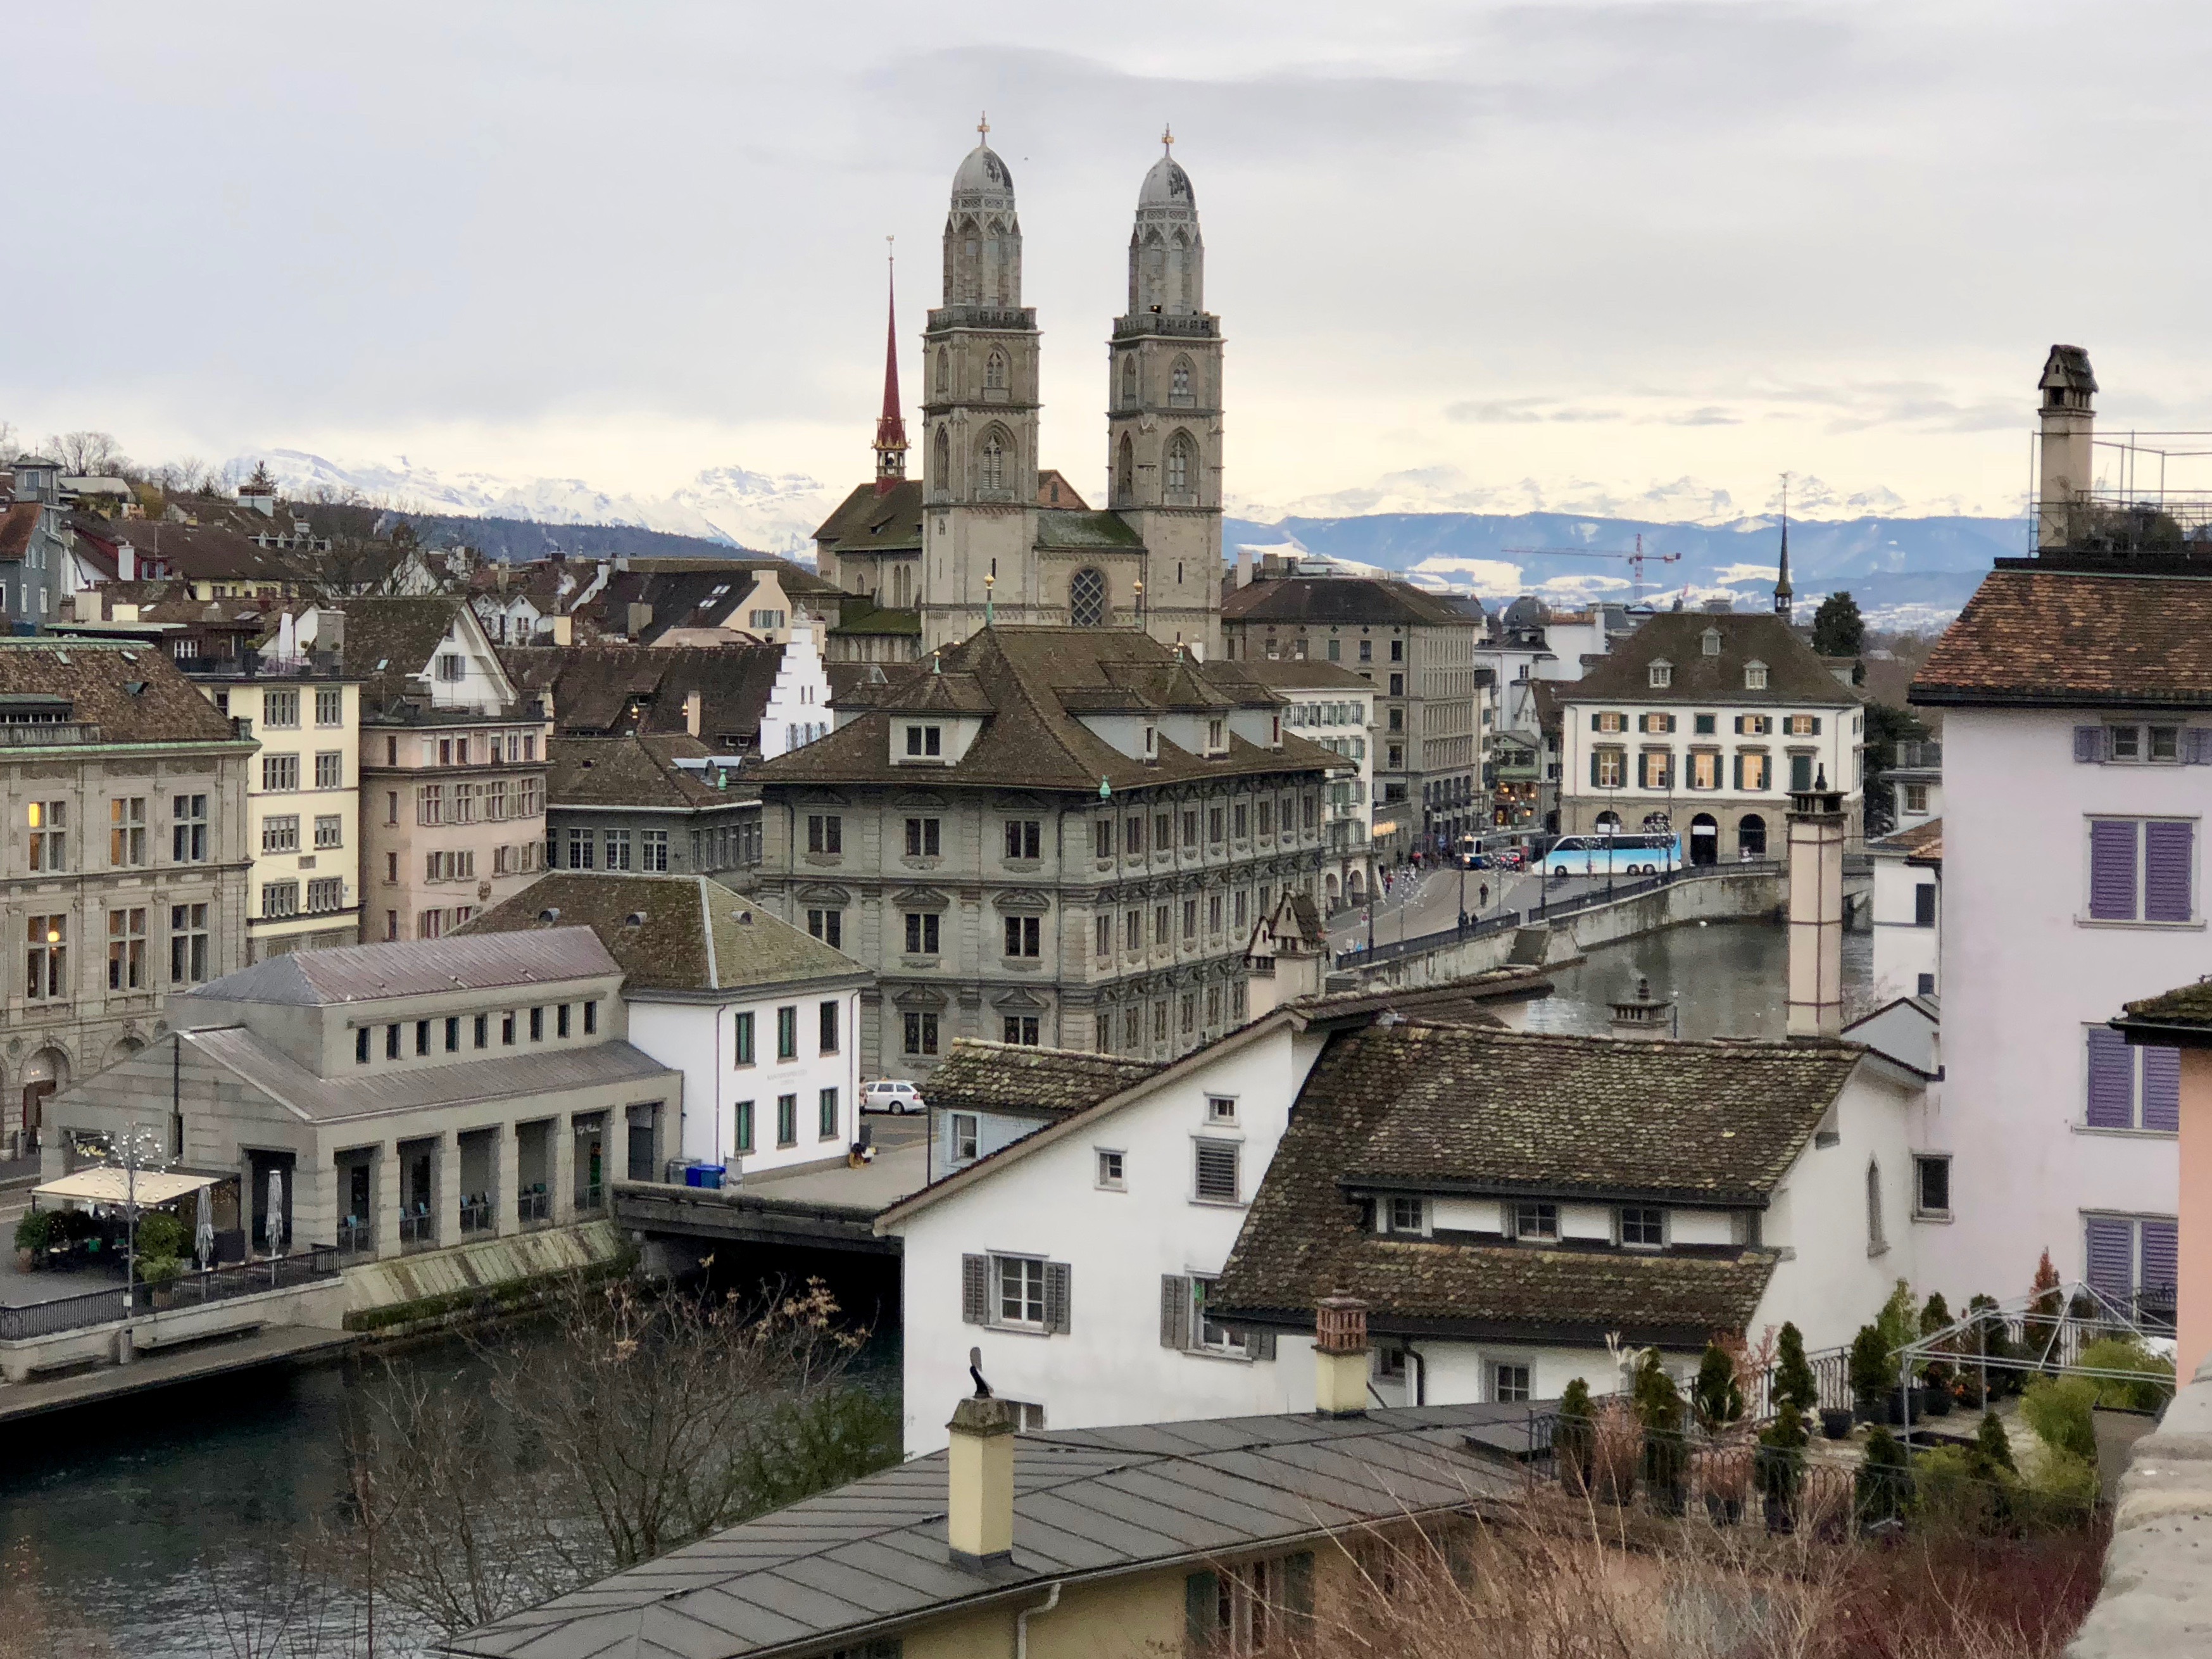 The view of Zurich and the Alps from Lindenhof.